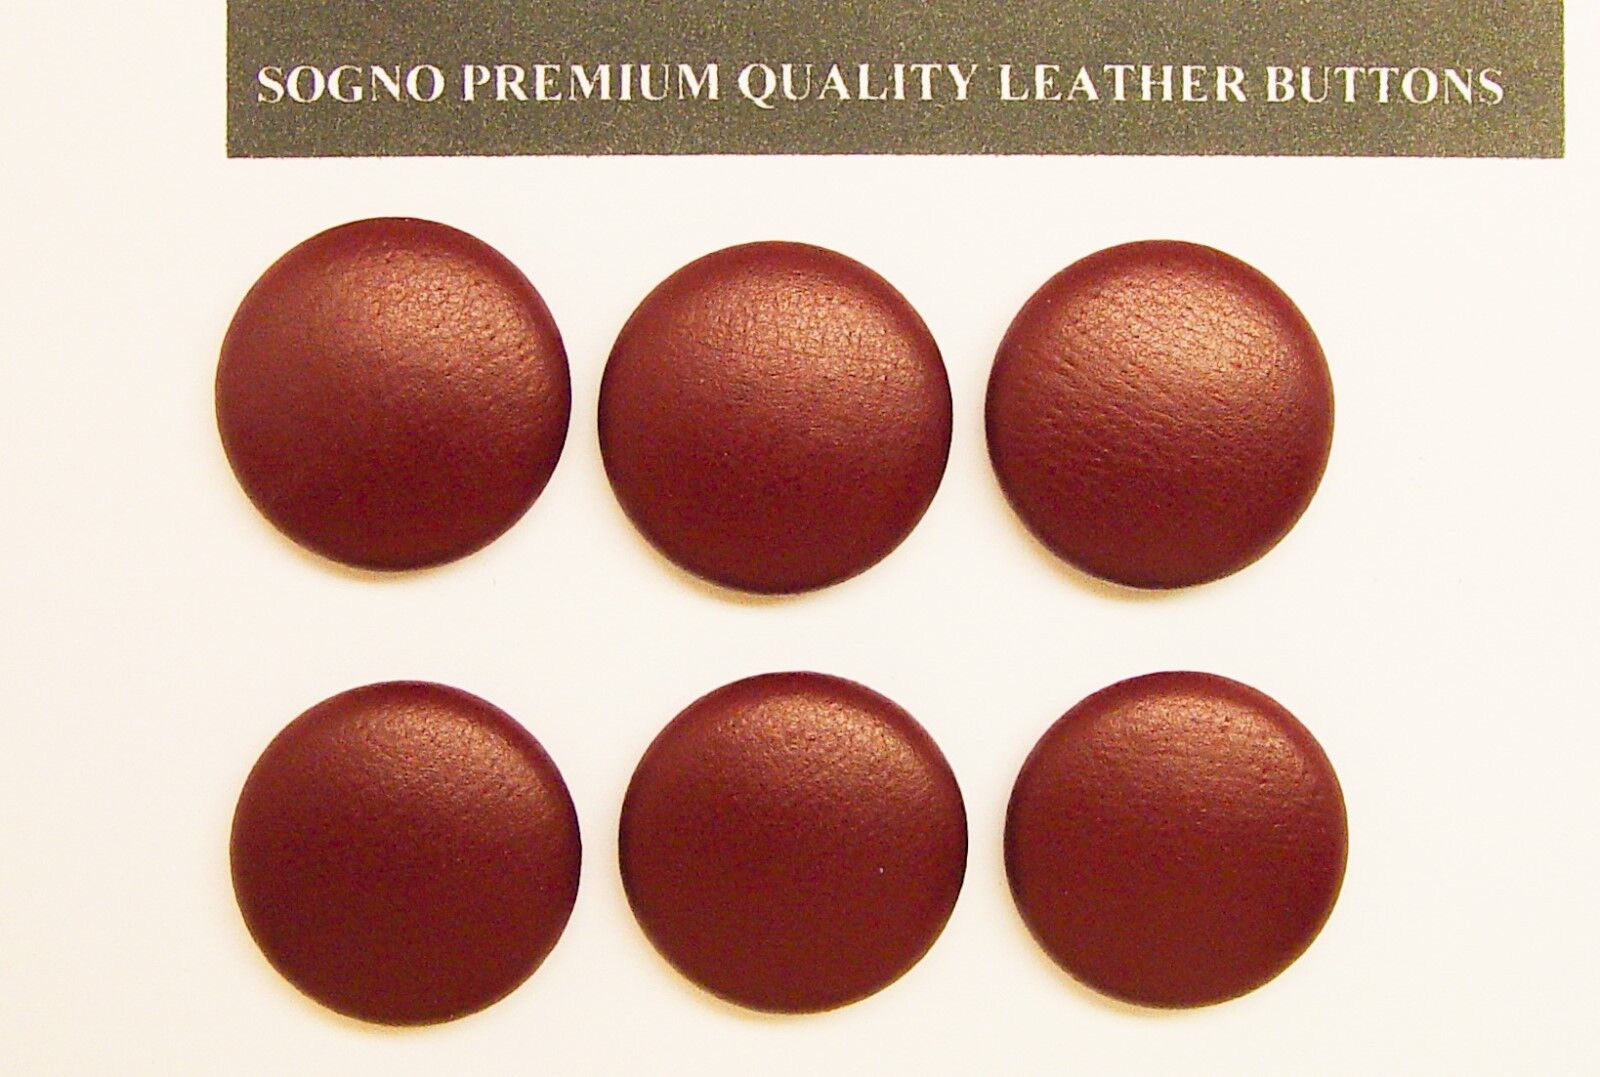 6 USA MADE REPLACEMENT BUTTONS FOR VINTAGE OUTFITS 23MM, CHESTNUT BROWN LEATHER